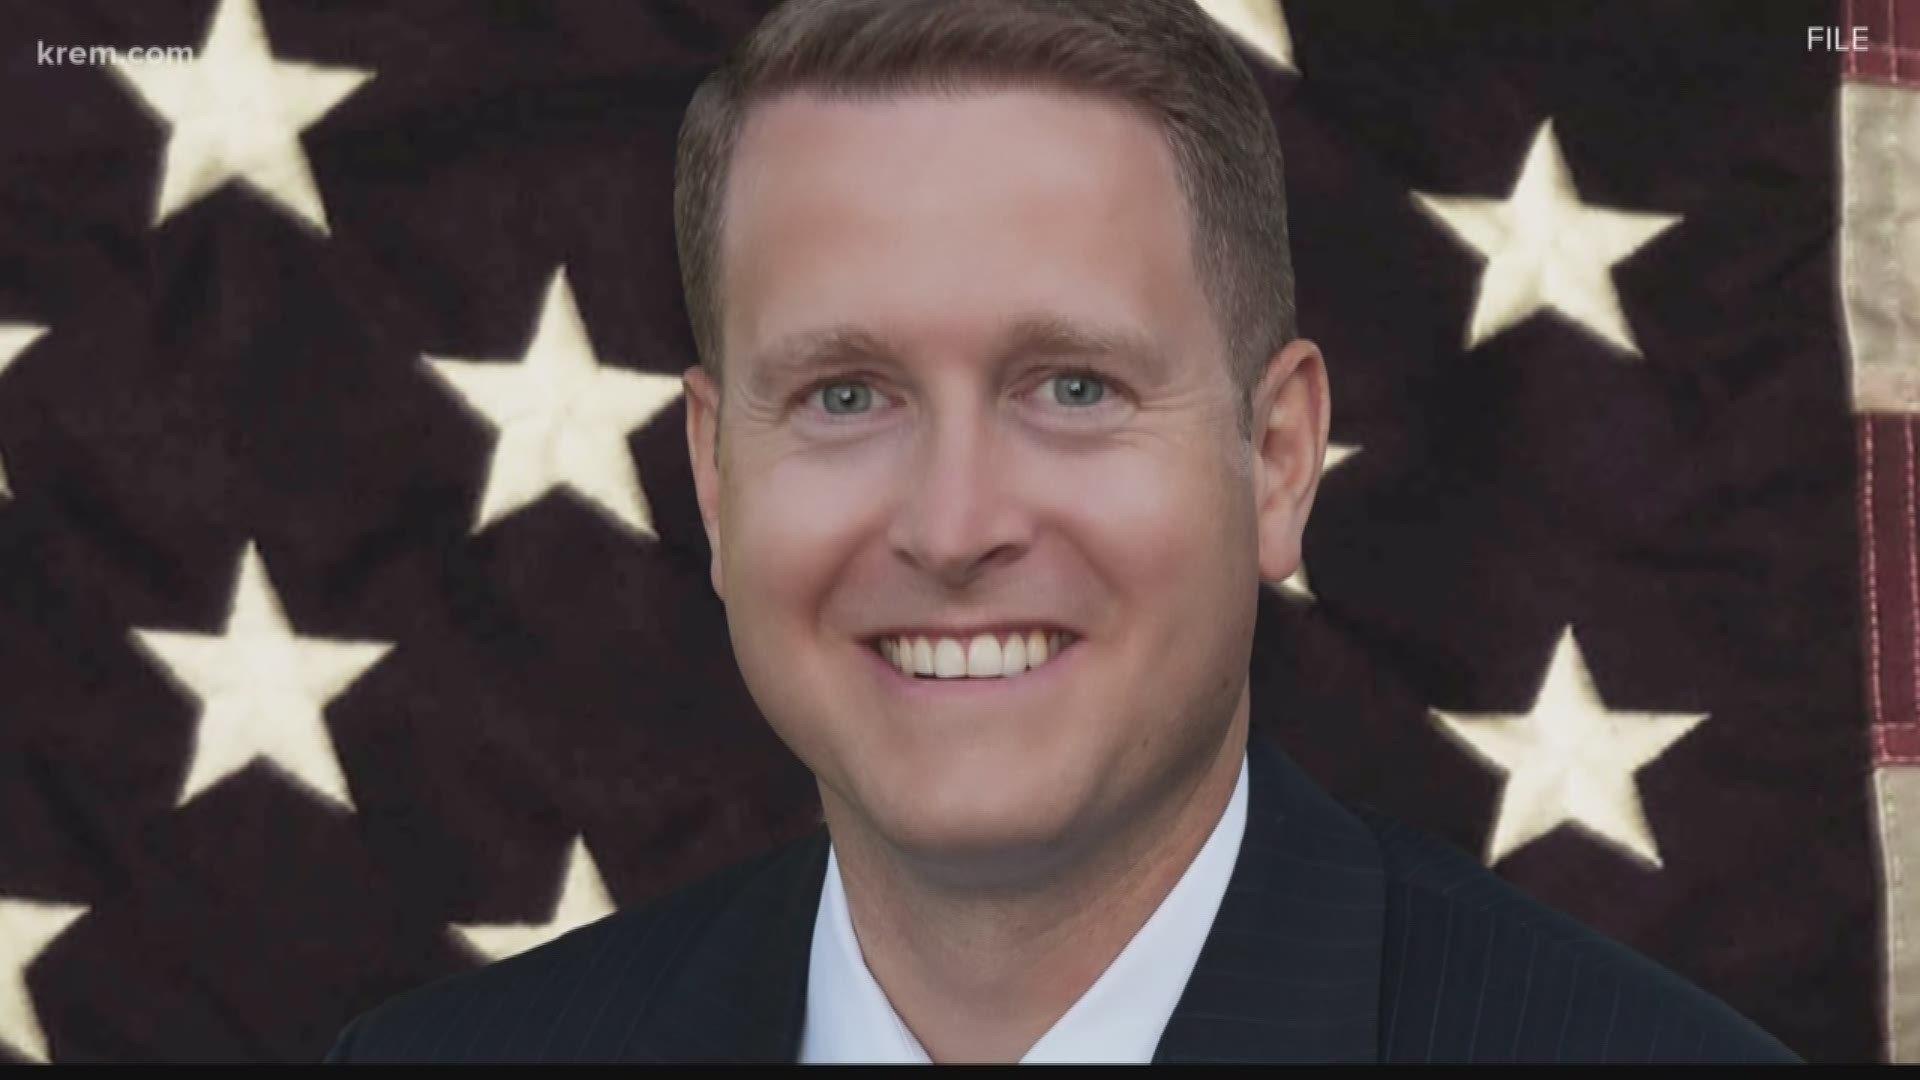 The Spokane Valley representative will enter the legislative session without a caucus, but with his seat, after an investigation accused him of domestic terrorism.